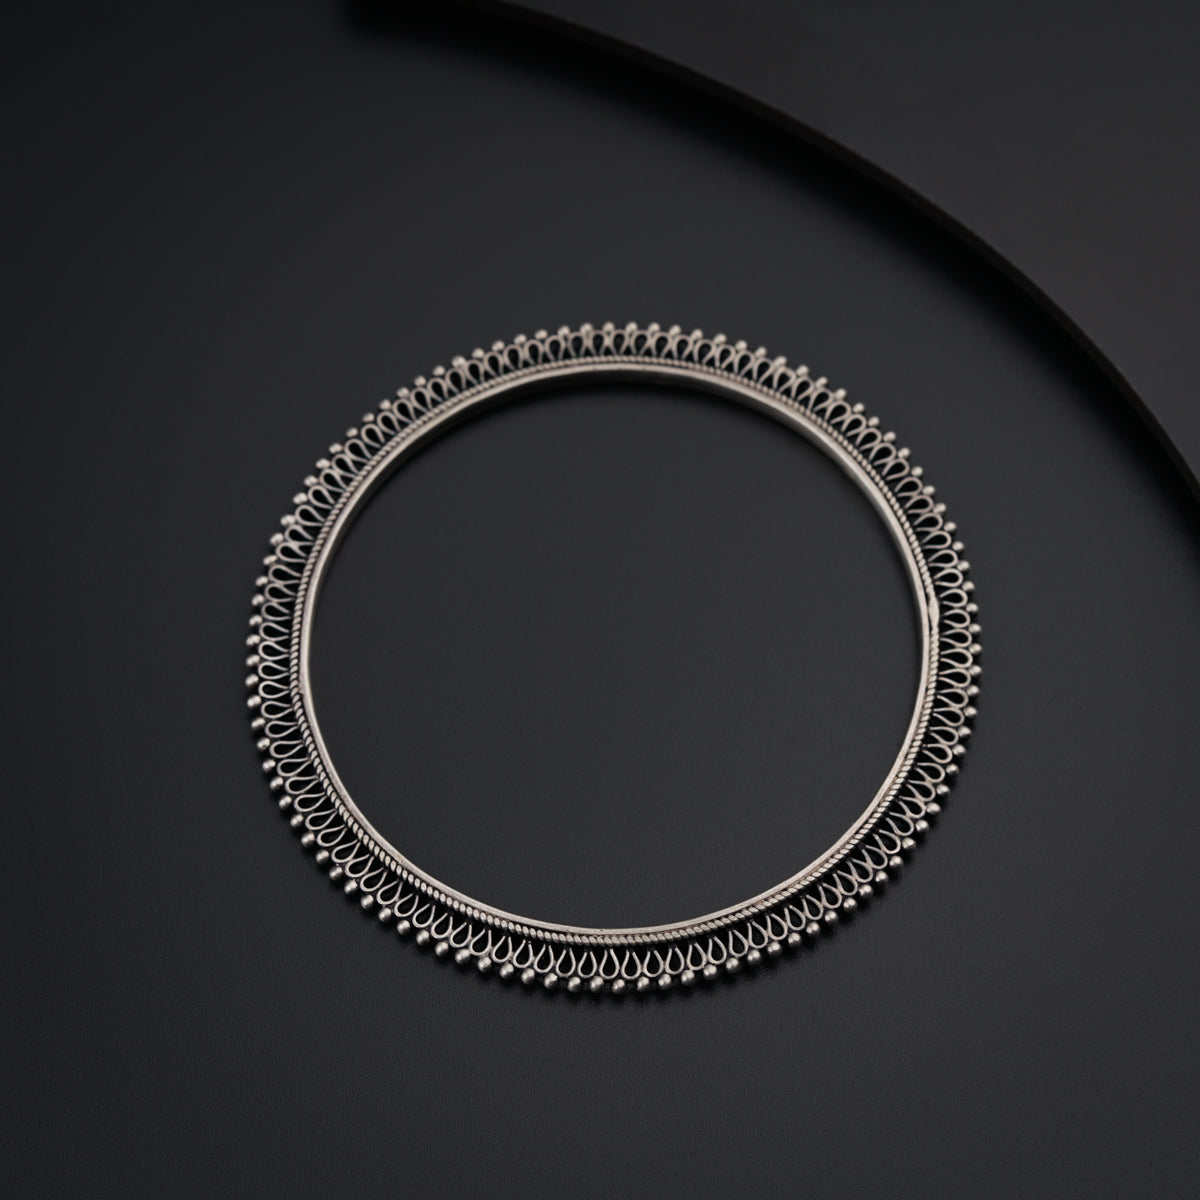 a silver bracelet with a black cord on a black surface